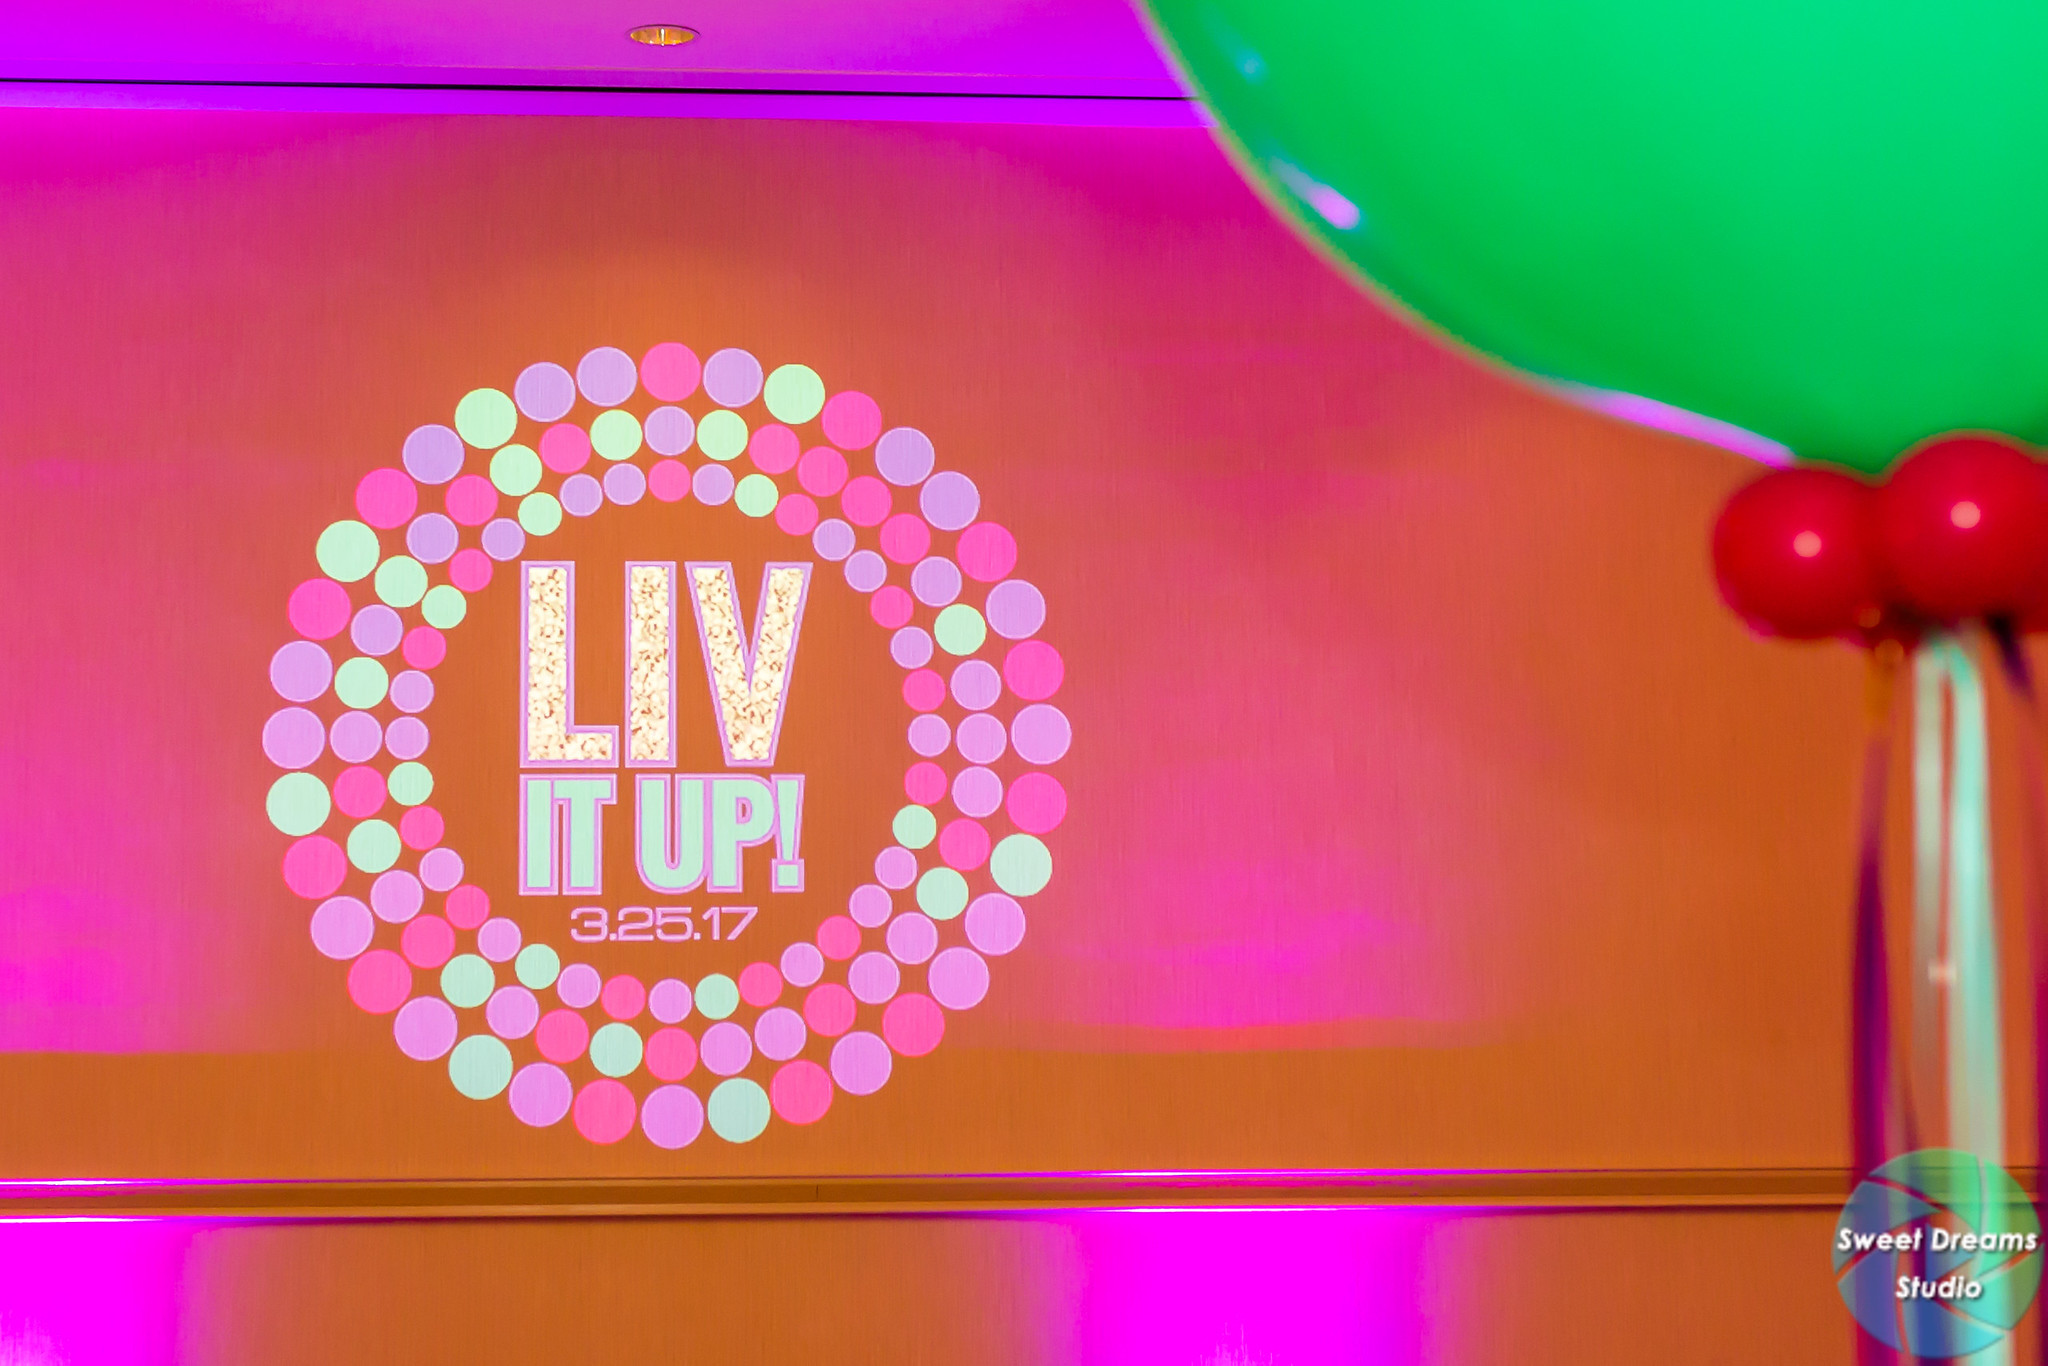 Liv it Up logo at Olivia's colorful, jewel-toned, balloon-filled Bat Mitzvah party at Hyatt Regency Dulles. Pink, purple, teal, turquoise and gold. | Pop Color Events | Adding a pop of color to Bar & Bat Mitzvahs in DC, MD & VA | Photo by Sweet Dreams Studios